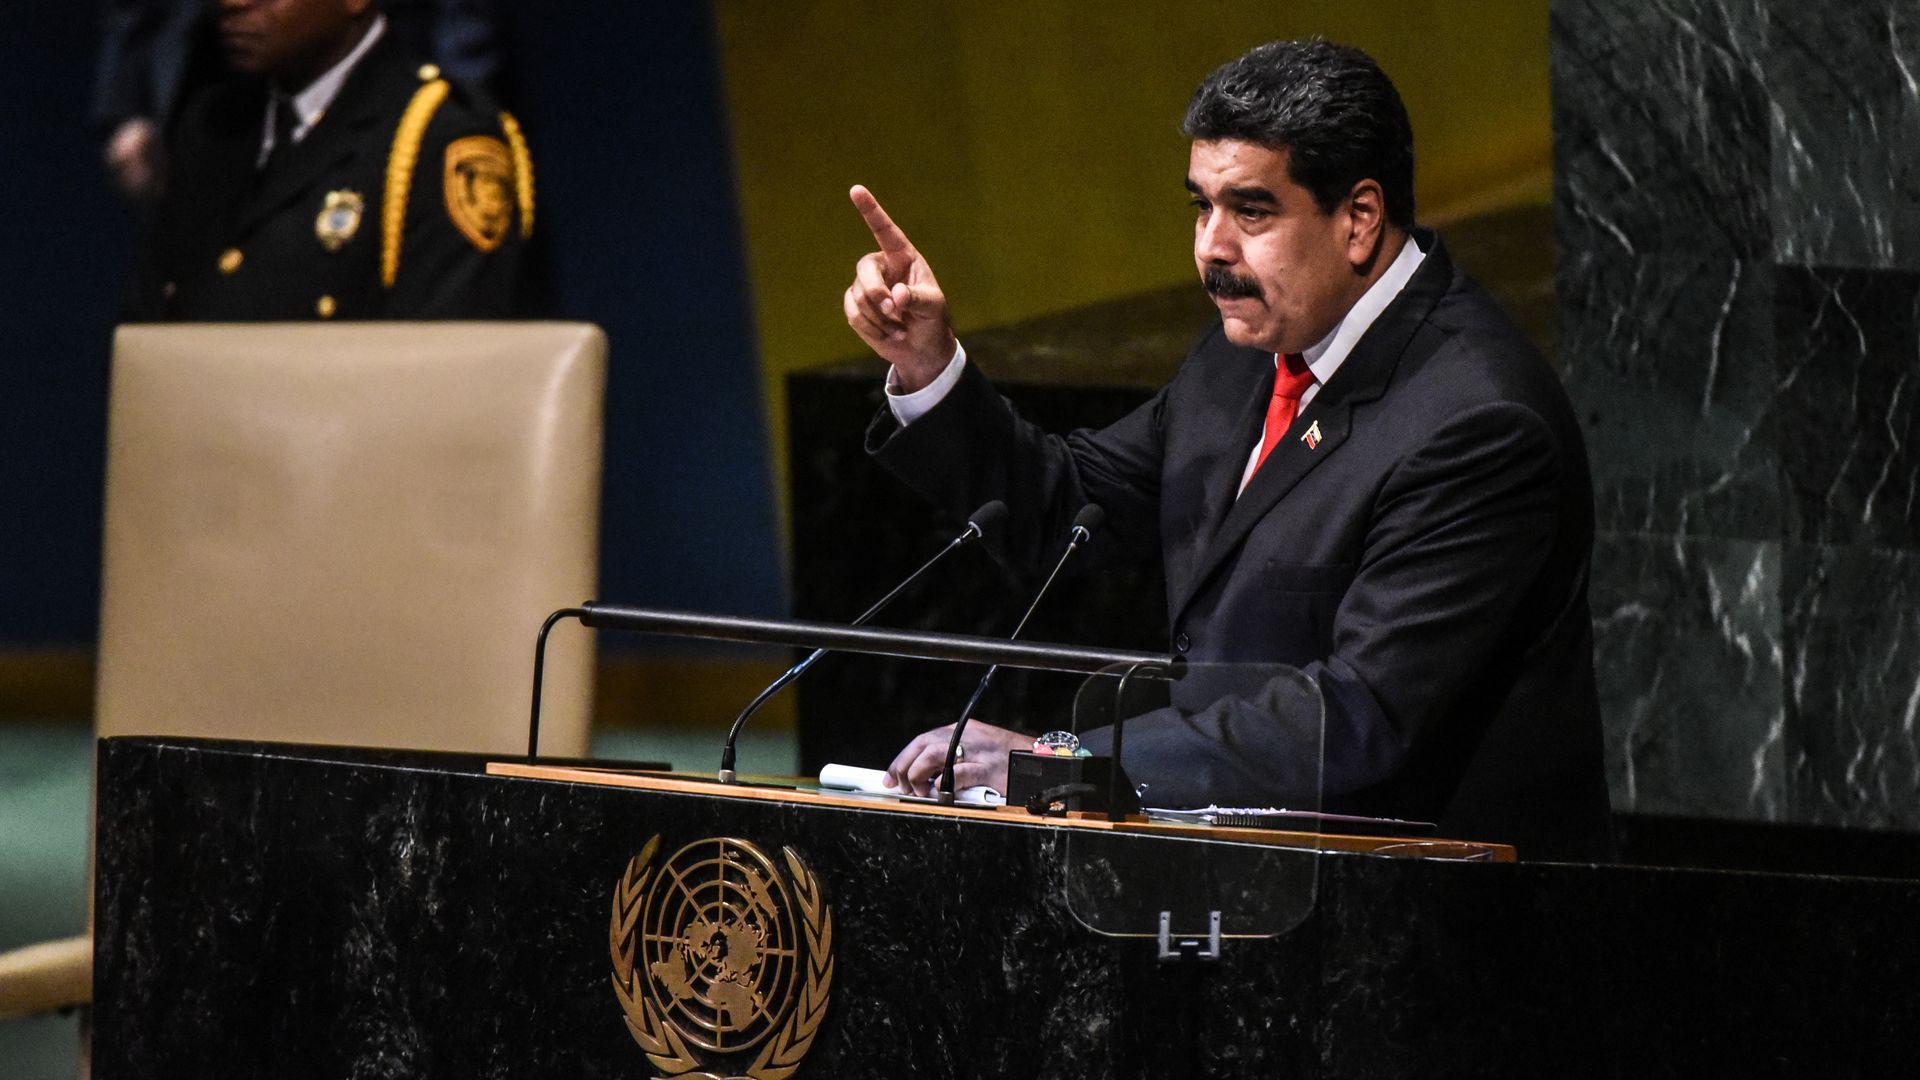 Nicolás Maduro, President of Venezuela delivers a speech at the United Nations during the General Assembly on September 26, 2018 in New York City. 